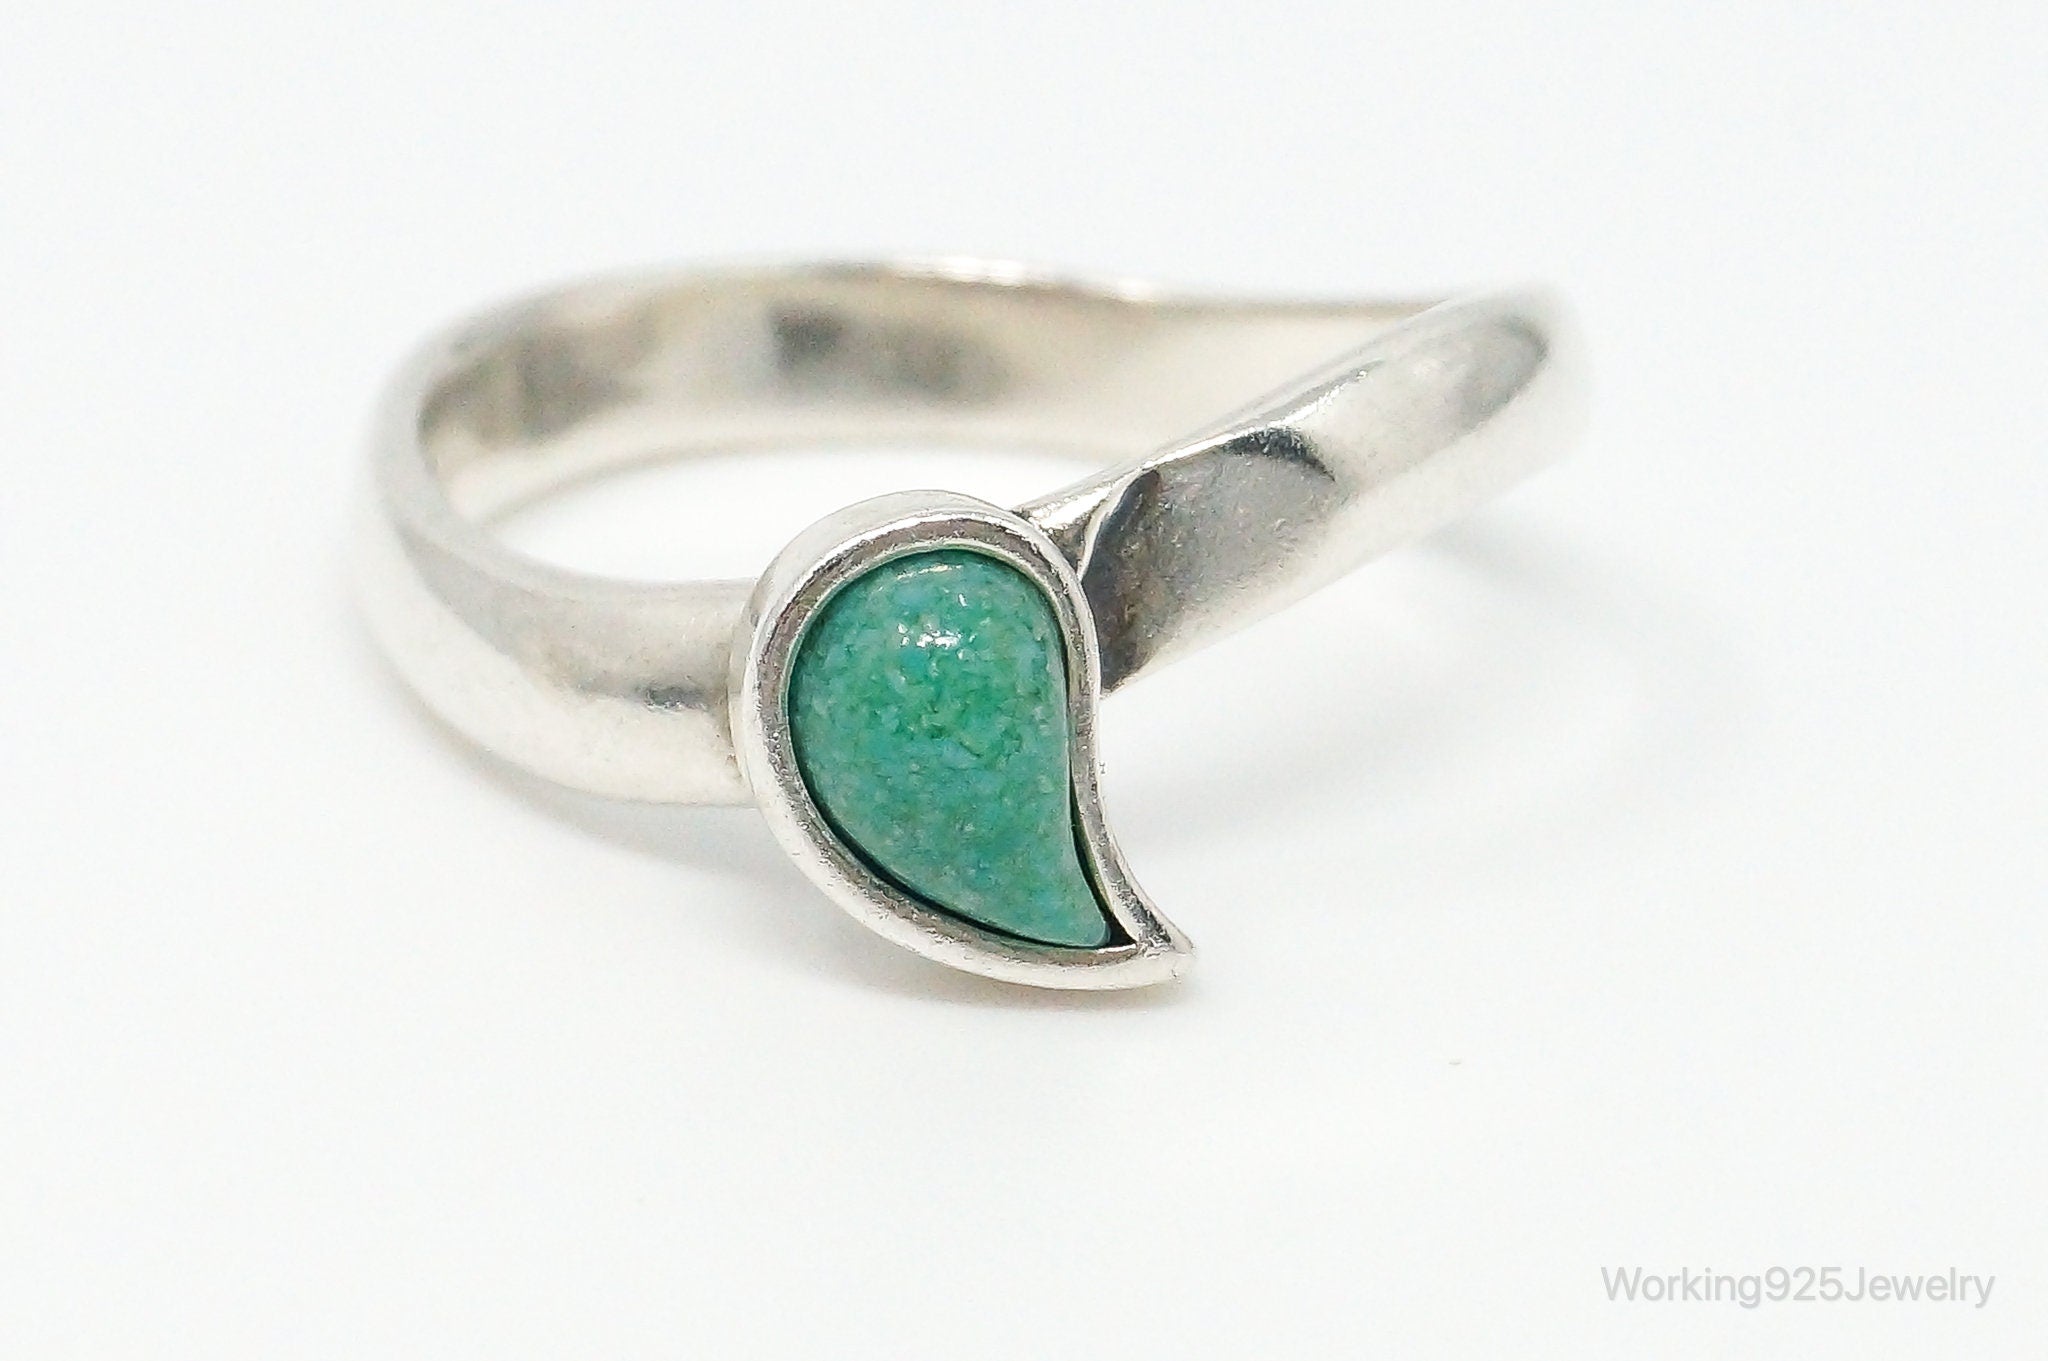 Southwestern Carolyn Pollack Relios Turquoise Sterling Silver Ring - Size 9